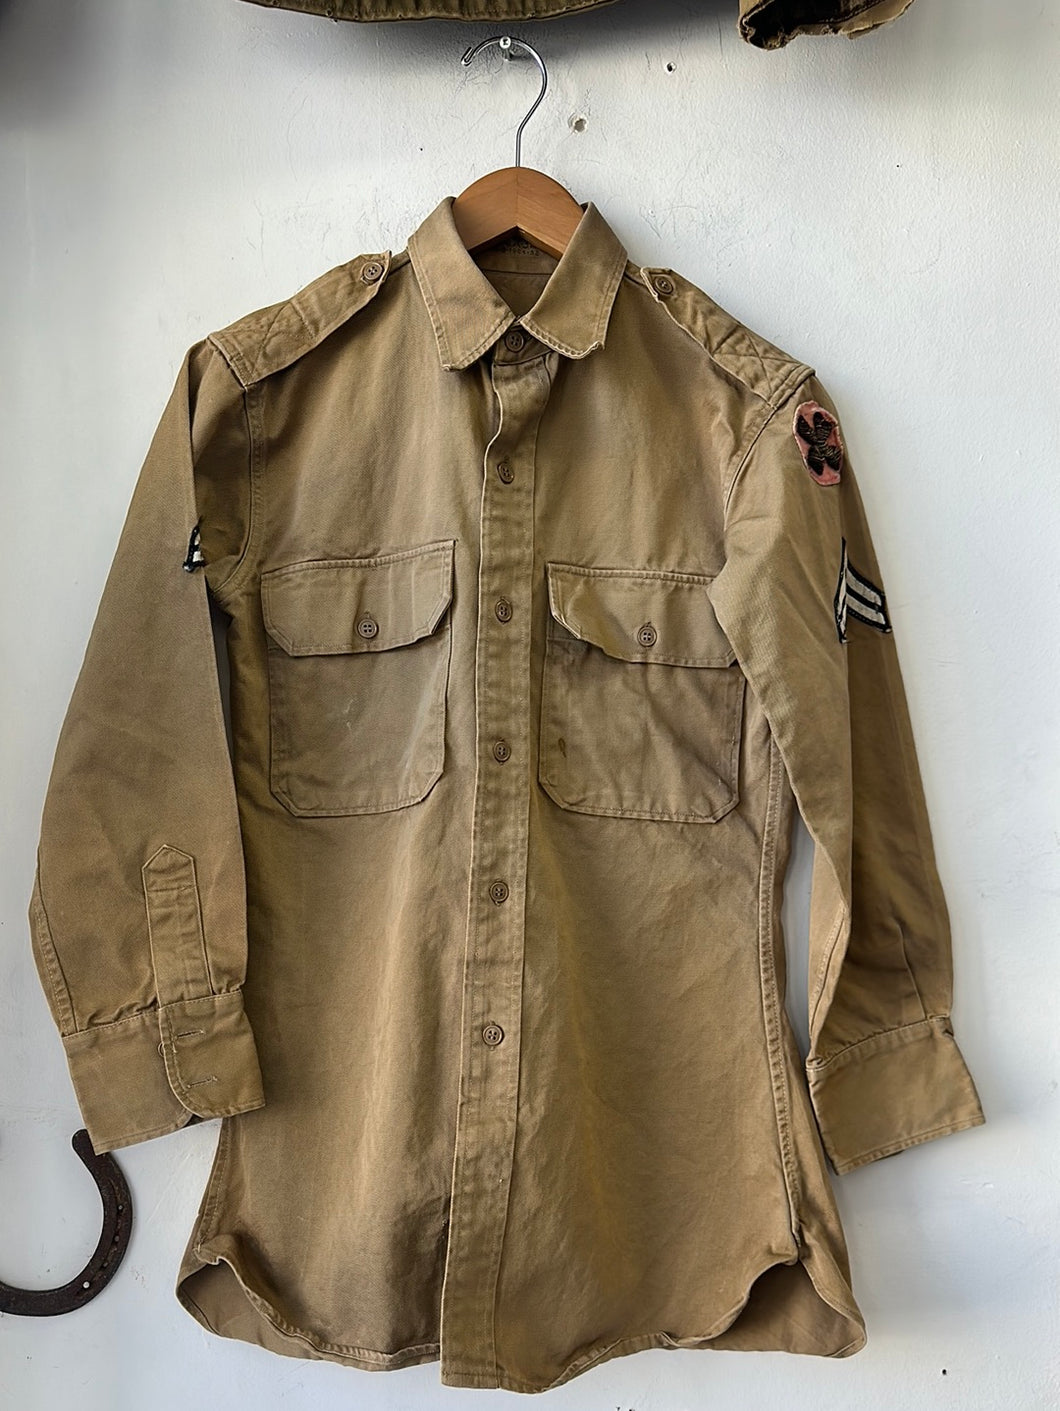 1964 Military Officers Patched Shirt